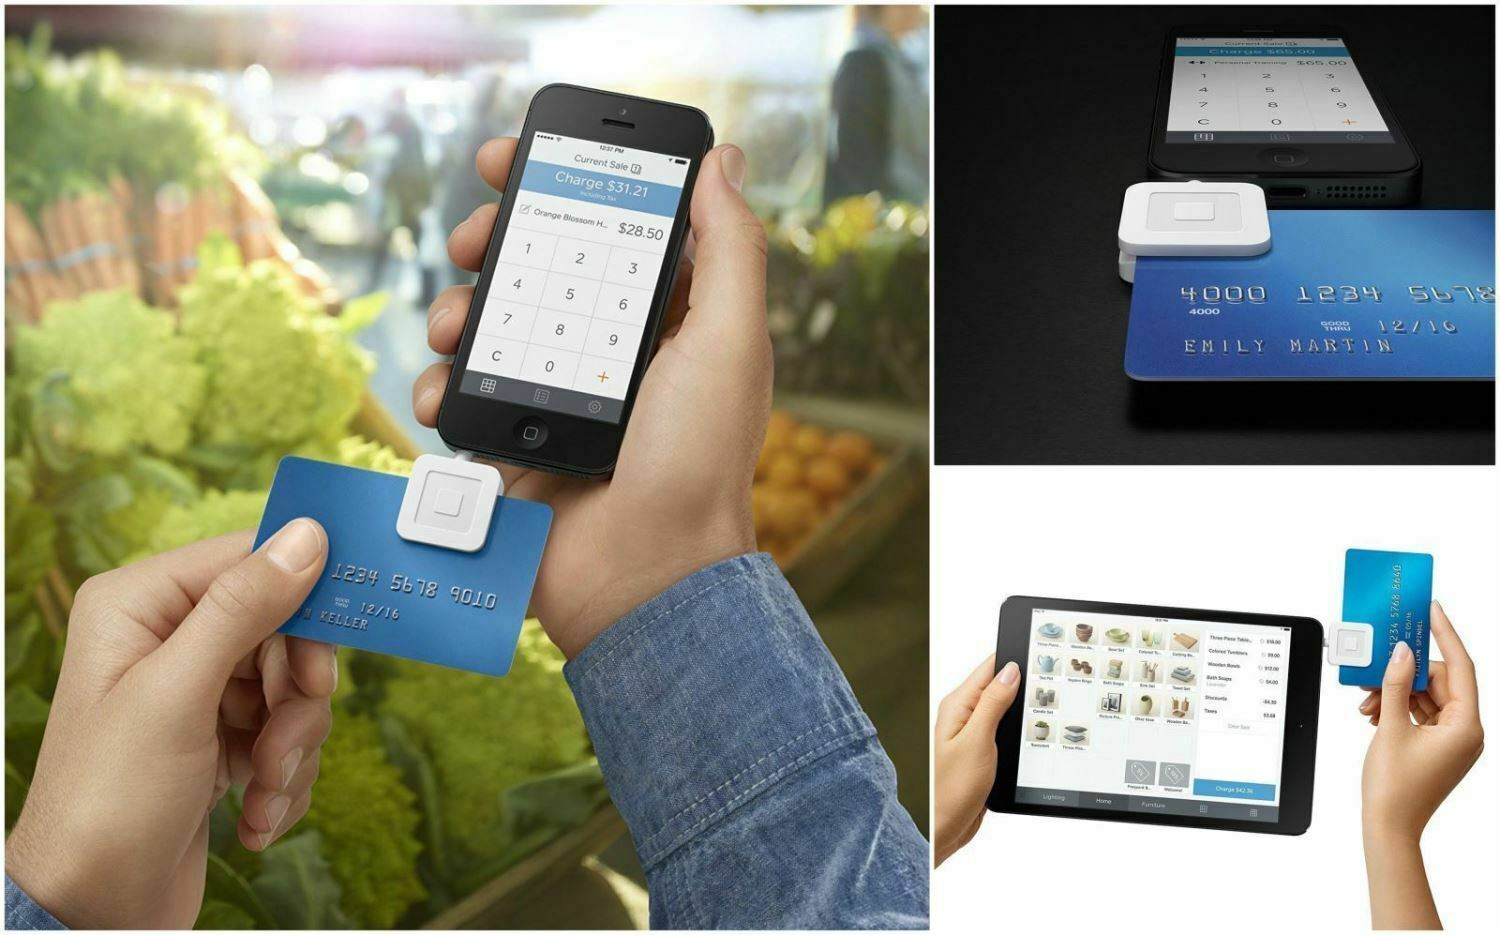 Square Mobile Debit Credit Card Reader Smart Phone Android Swipe Payment New - Credit Card ...